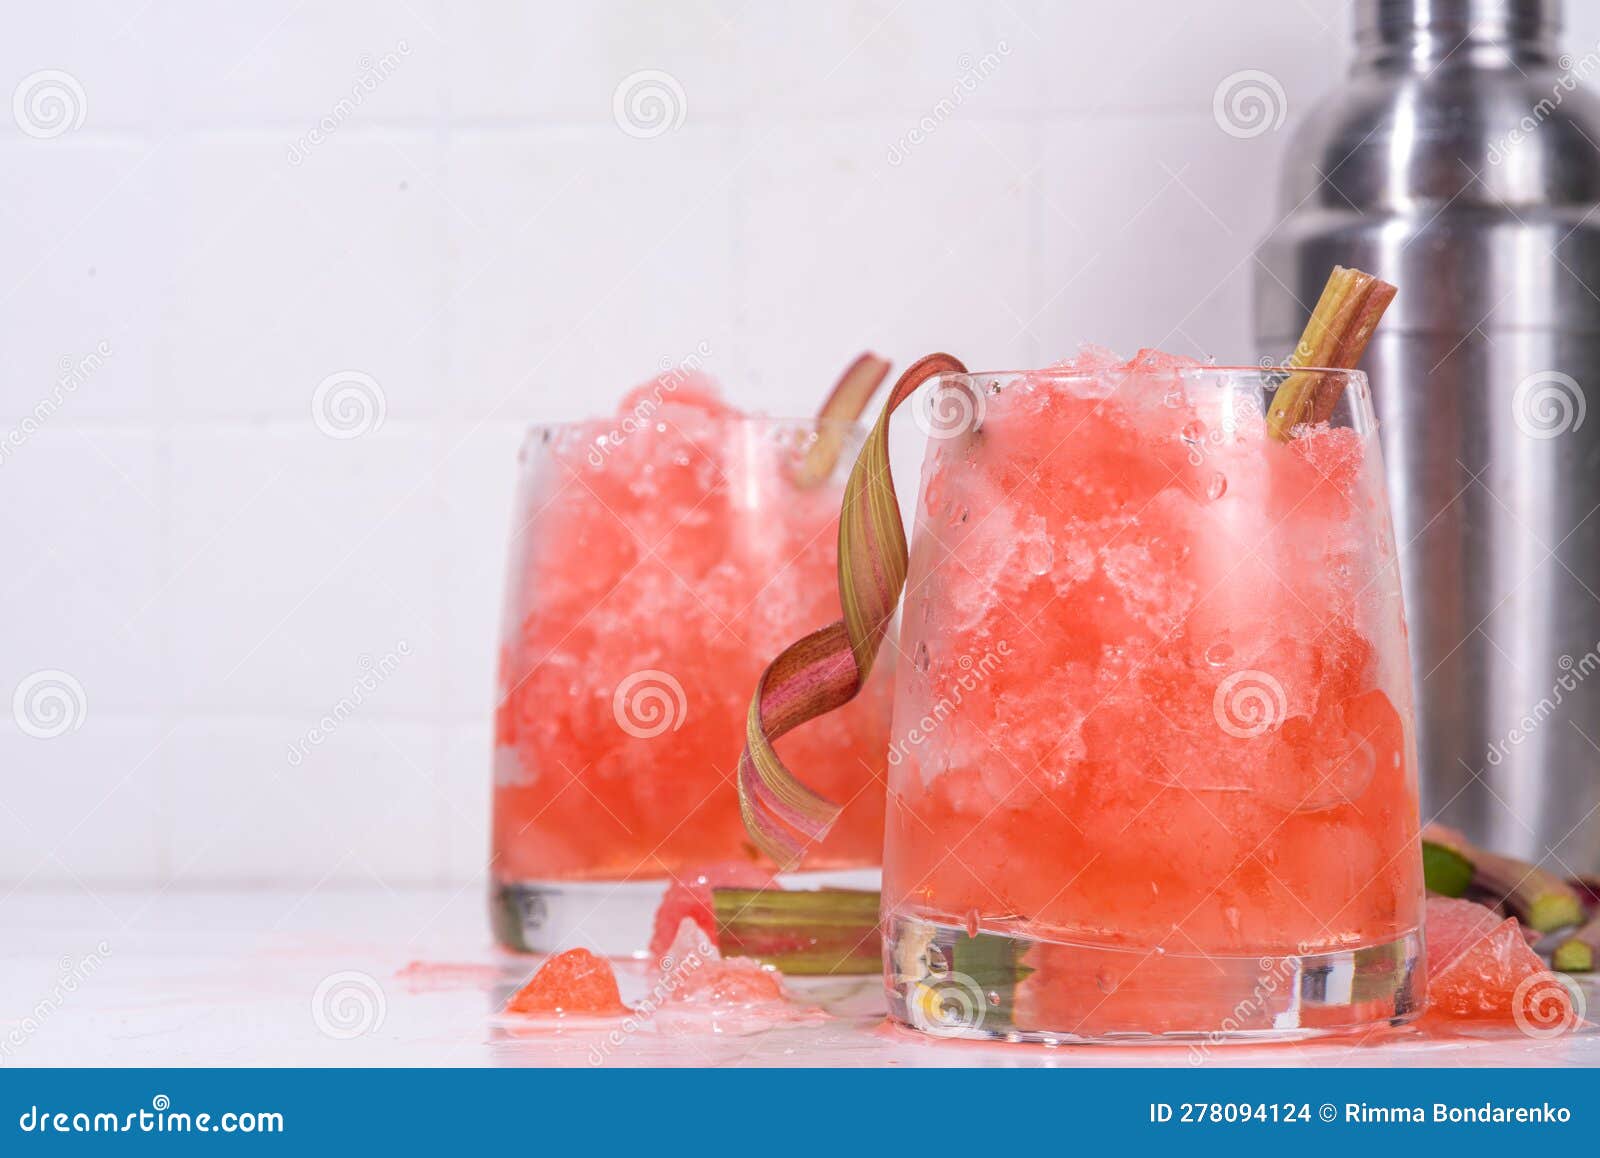 Refreshing Rhubarb Sour Fizz Cocktail Stock Photo - Image of food, glasses:  278094124